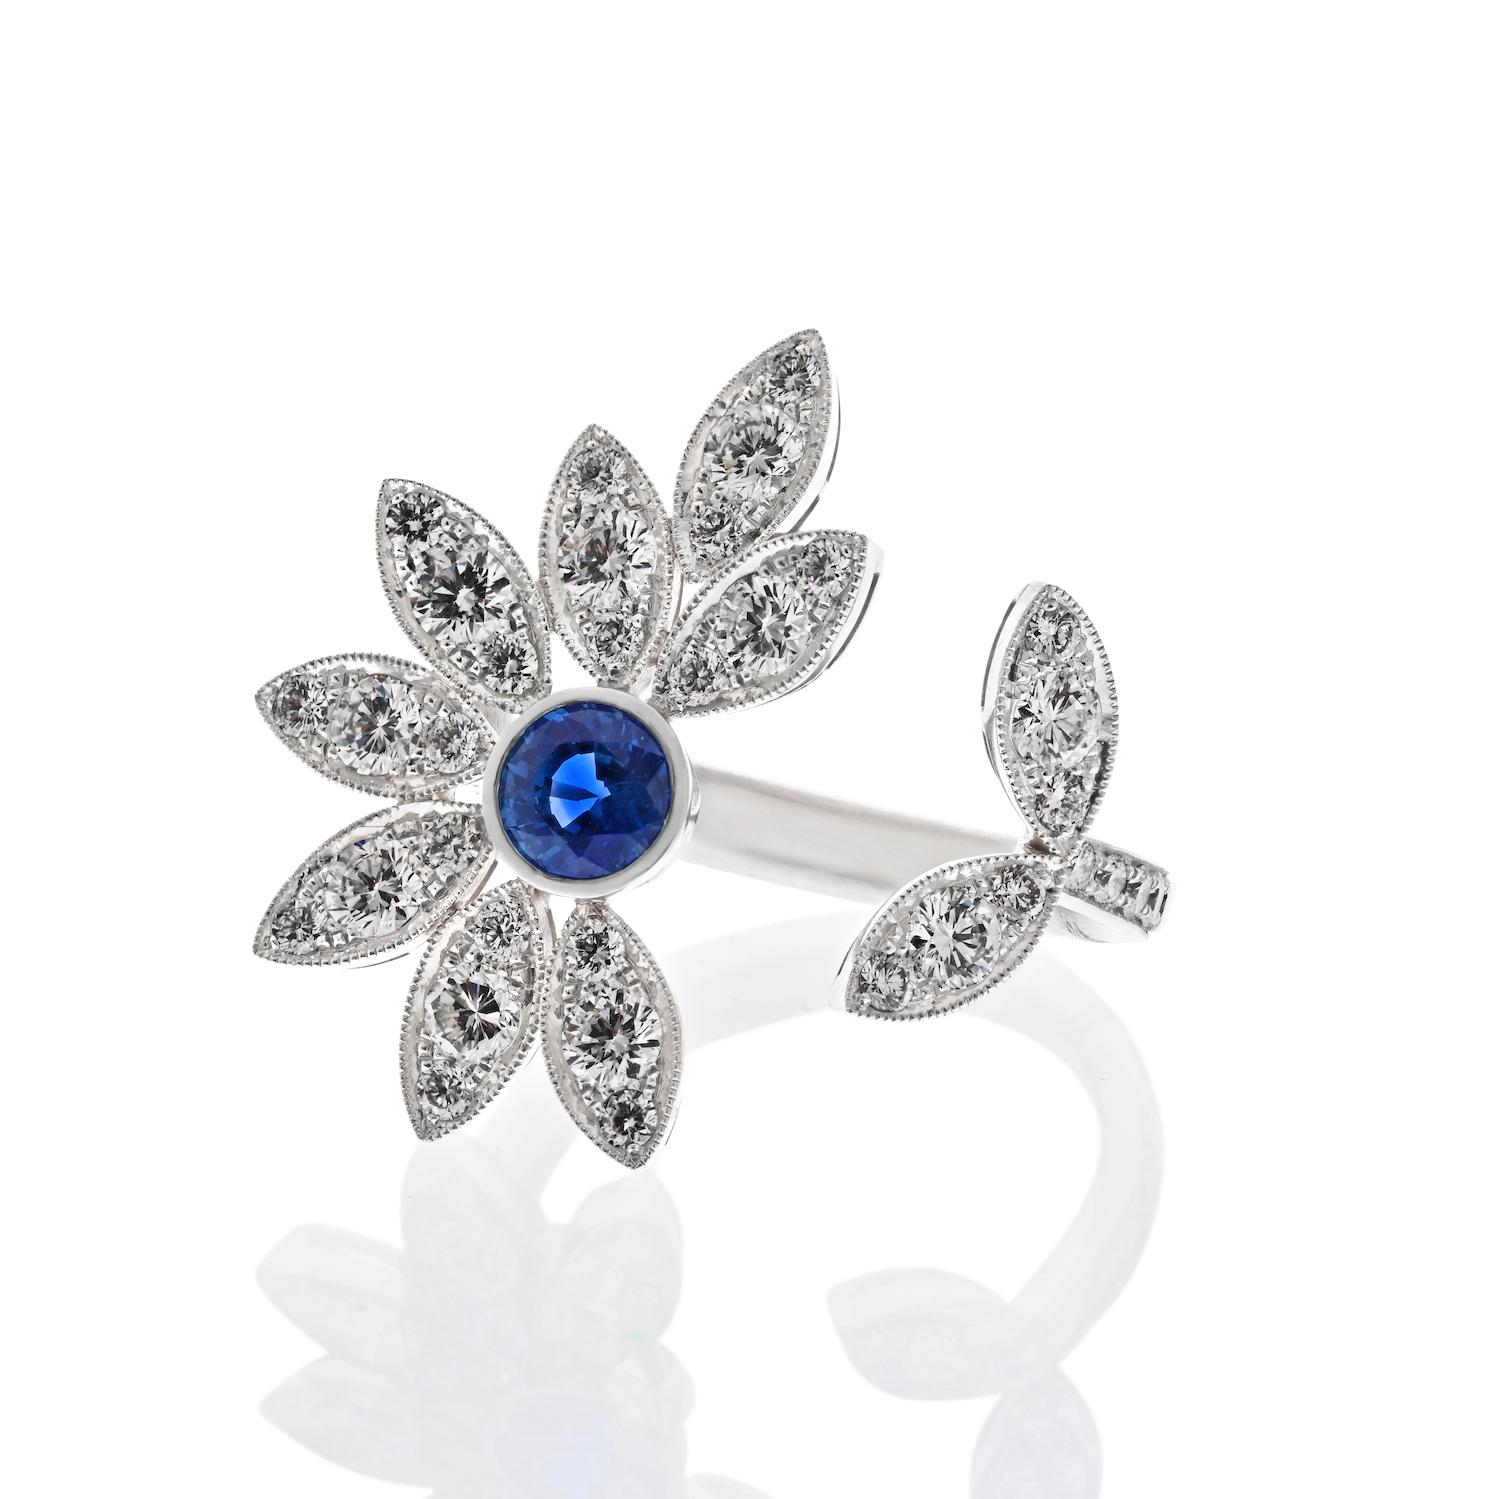 This platinum between-the-finger ring is a stunning floral design featuring a round sapphire at the center, securely set within a bezel. The petals of the flower are adorned with pave-set diamonds, adding up to an approximate total carat weight of